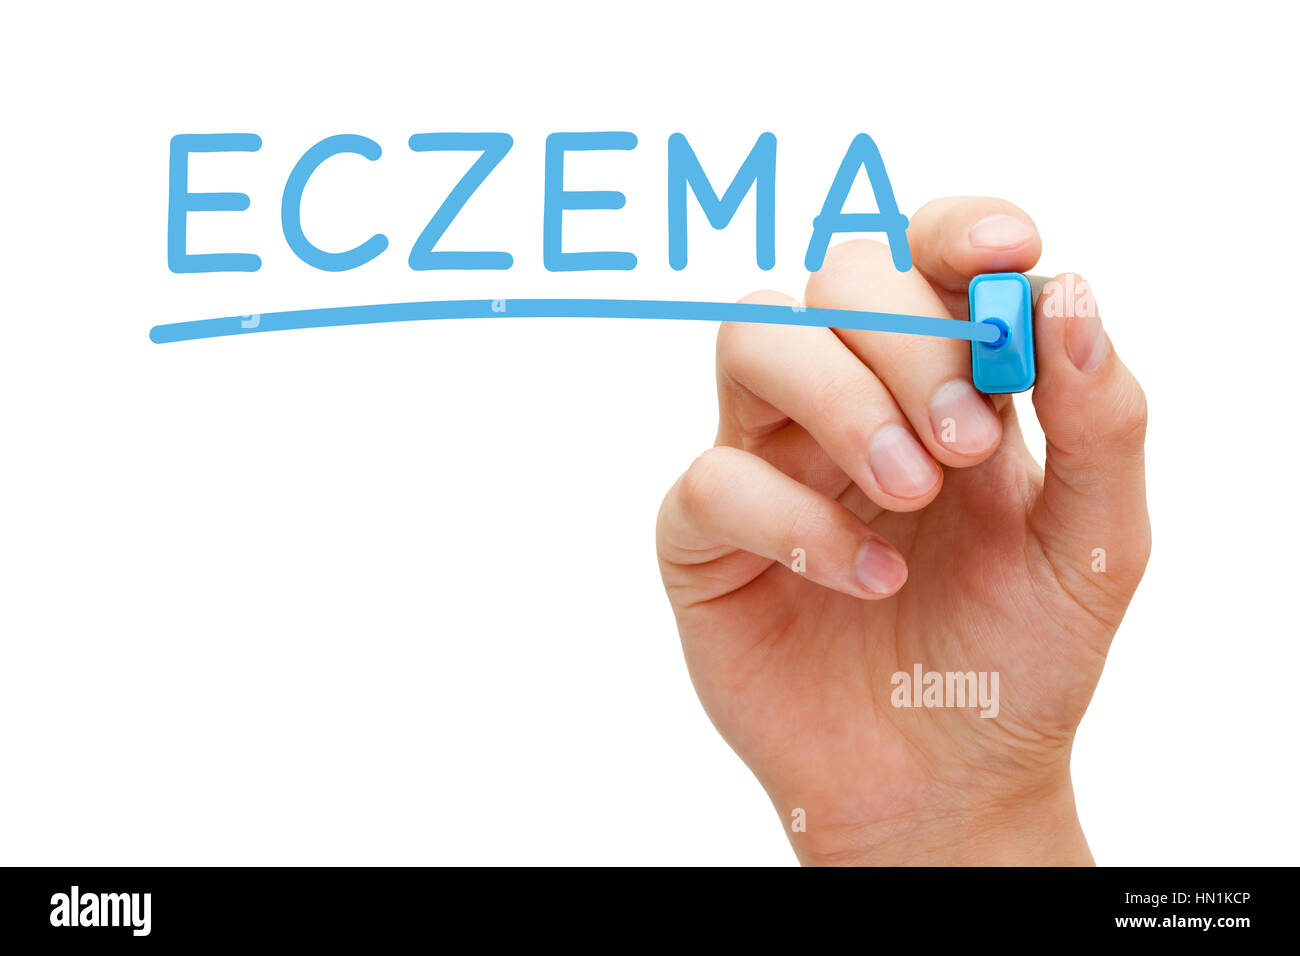 Hand writing Eczema with blue marker on transparent glass board. Stock Photo